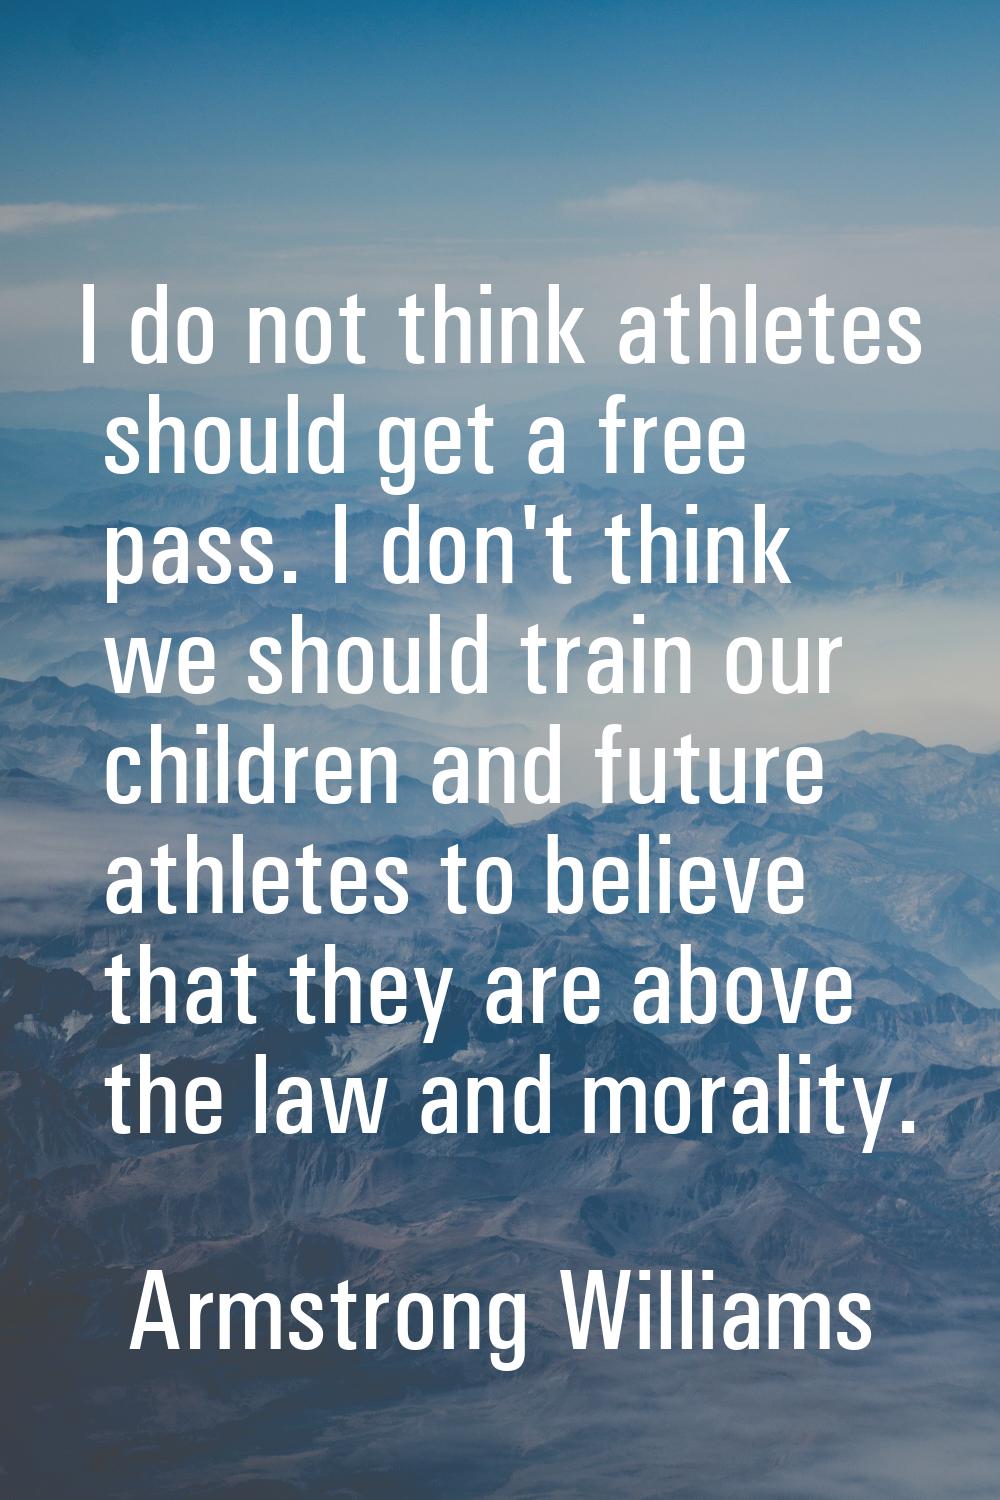 I do not think athletes should get a free pass. I don't think we should train our children and futu